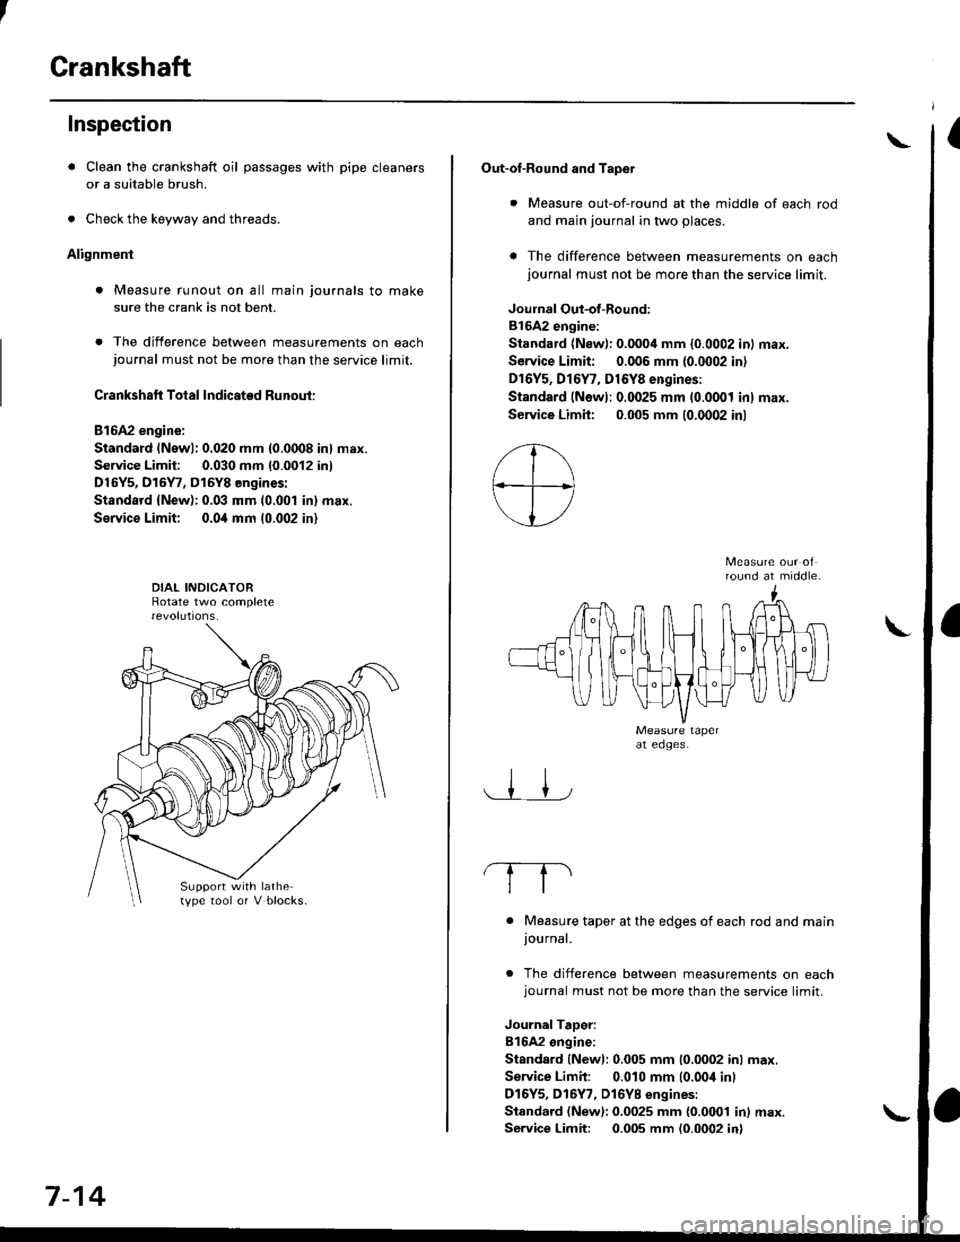 HONDA CIVIC 1998 6.G Workshop Manual Crankshaft
Inspection
. Clean the crankshaft oil passages with pipe cleaners
or a suitable brush.
. Check the keyway and threads.
Alignment
. Measure runout on all main journals to make
sure the crank